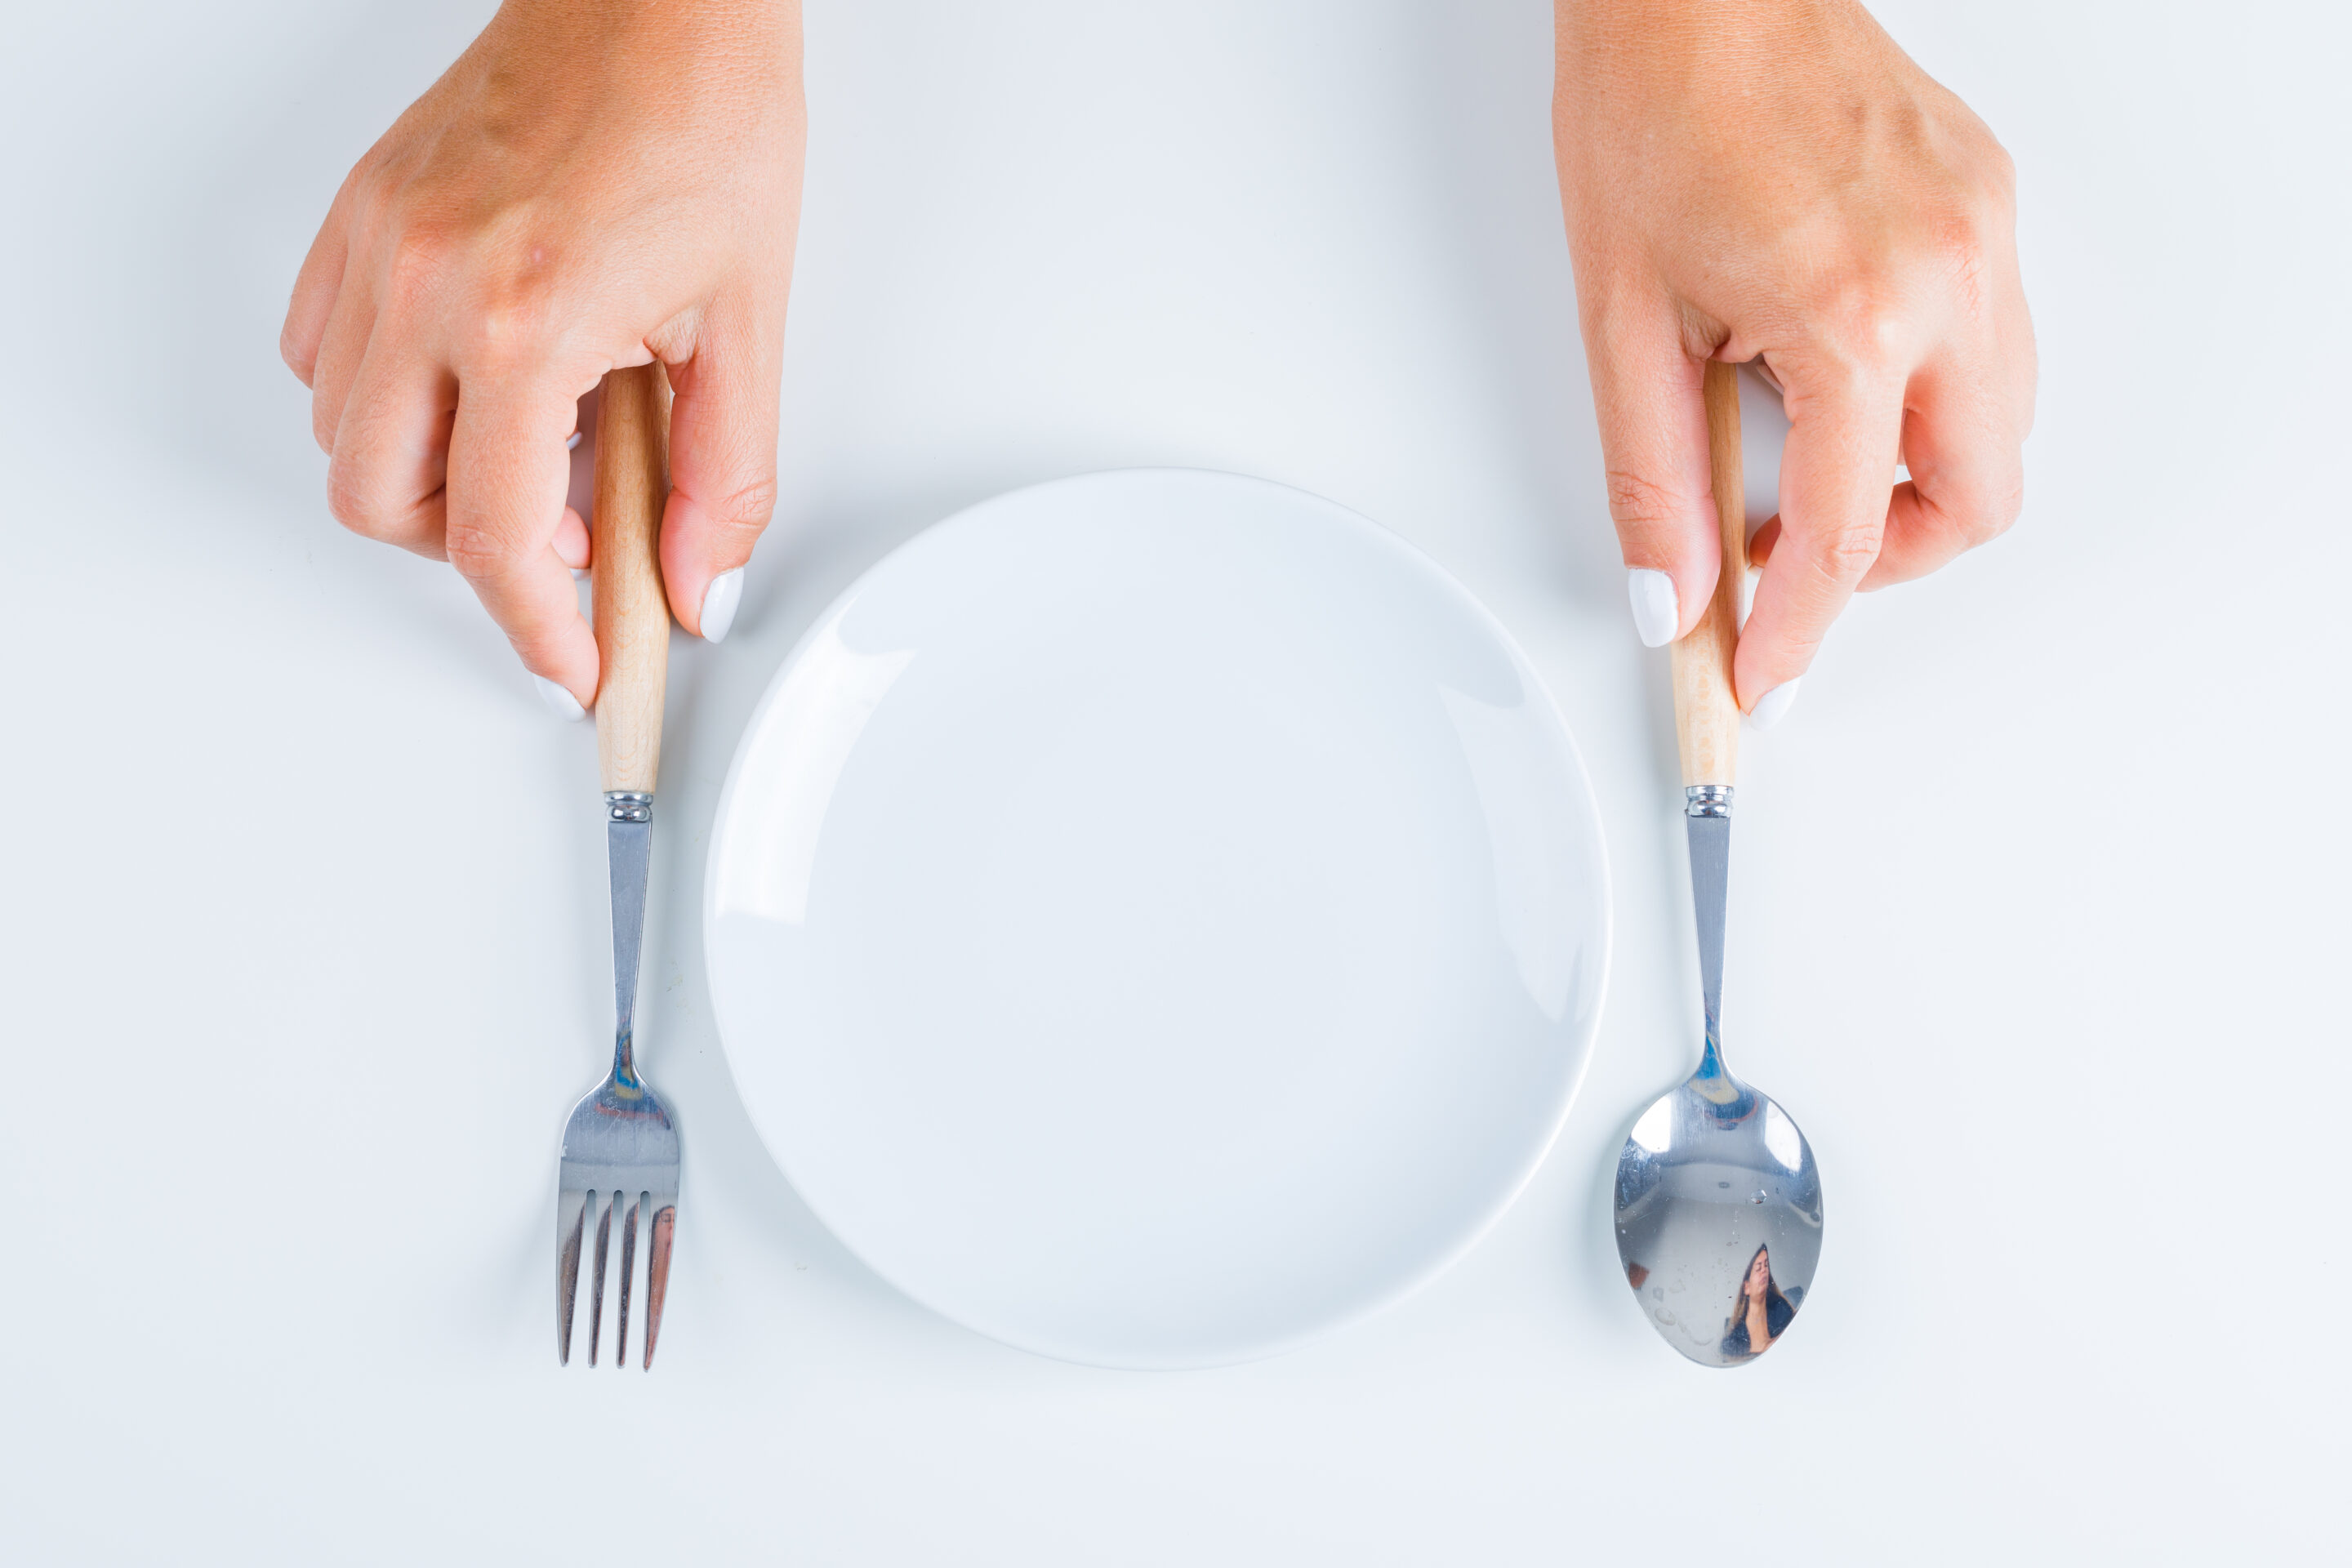 Intermittent Fasting: It’s Not Black and White